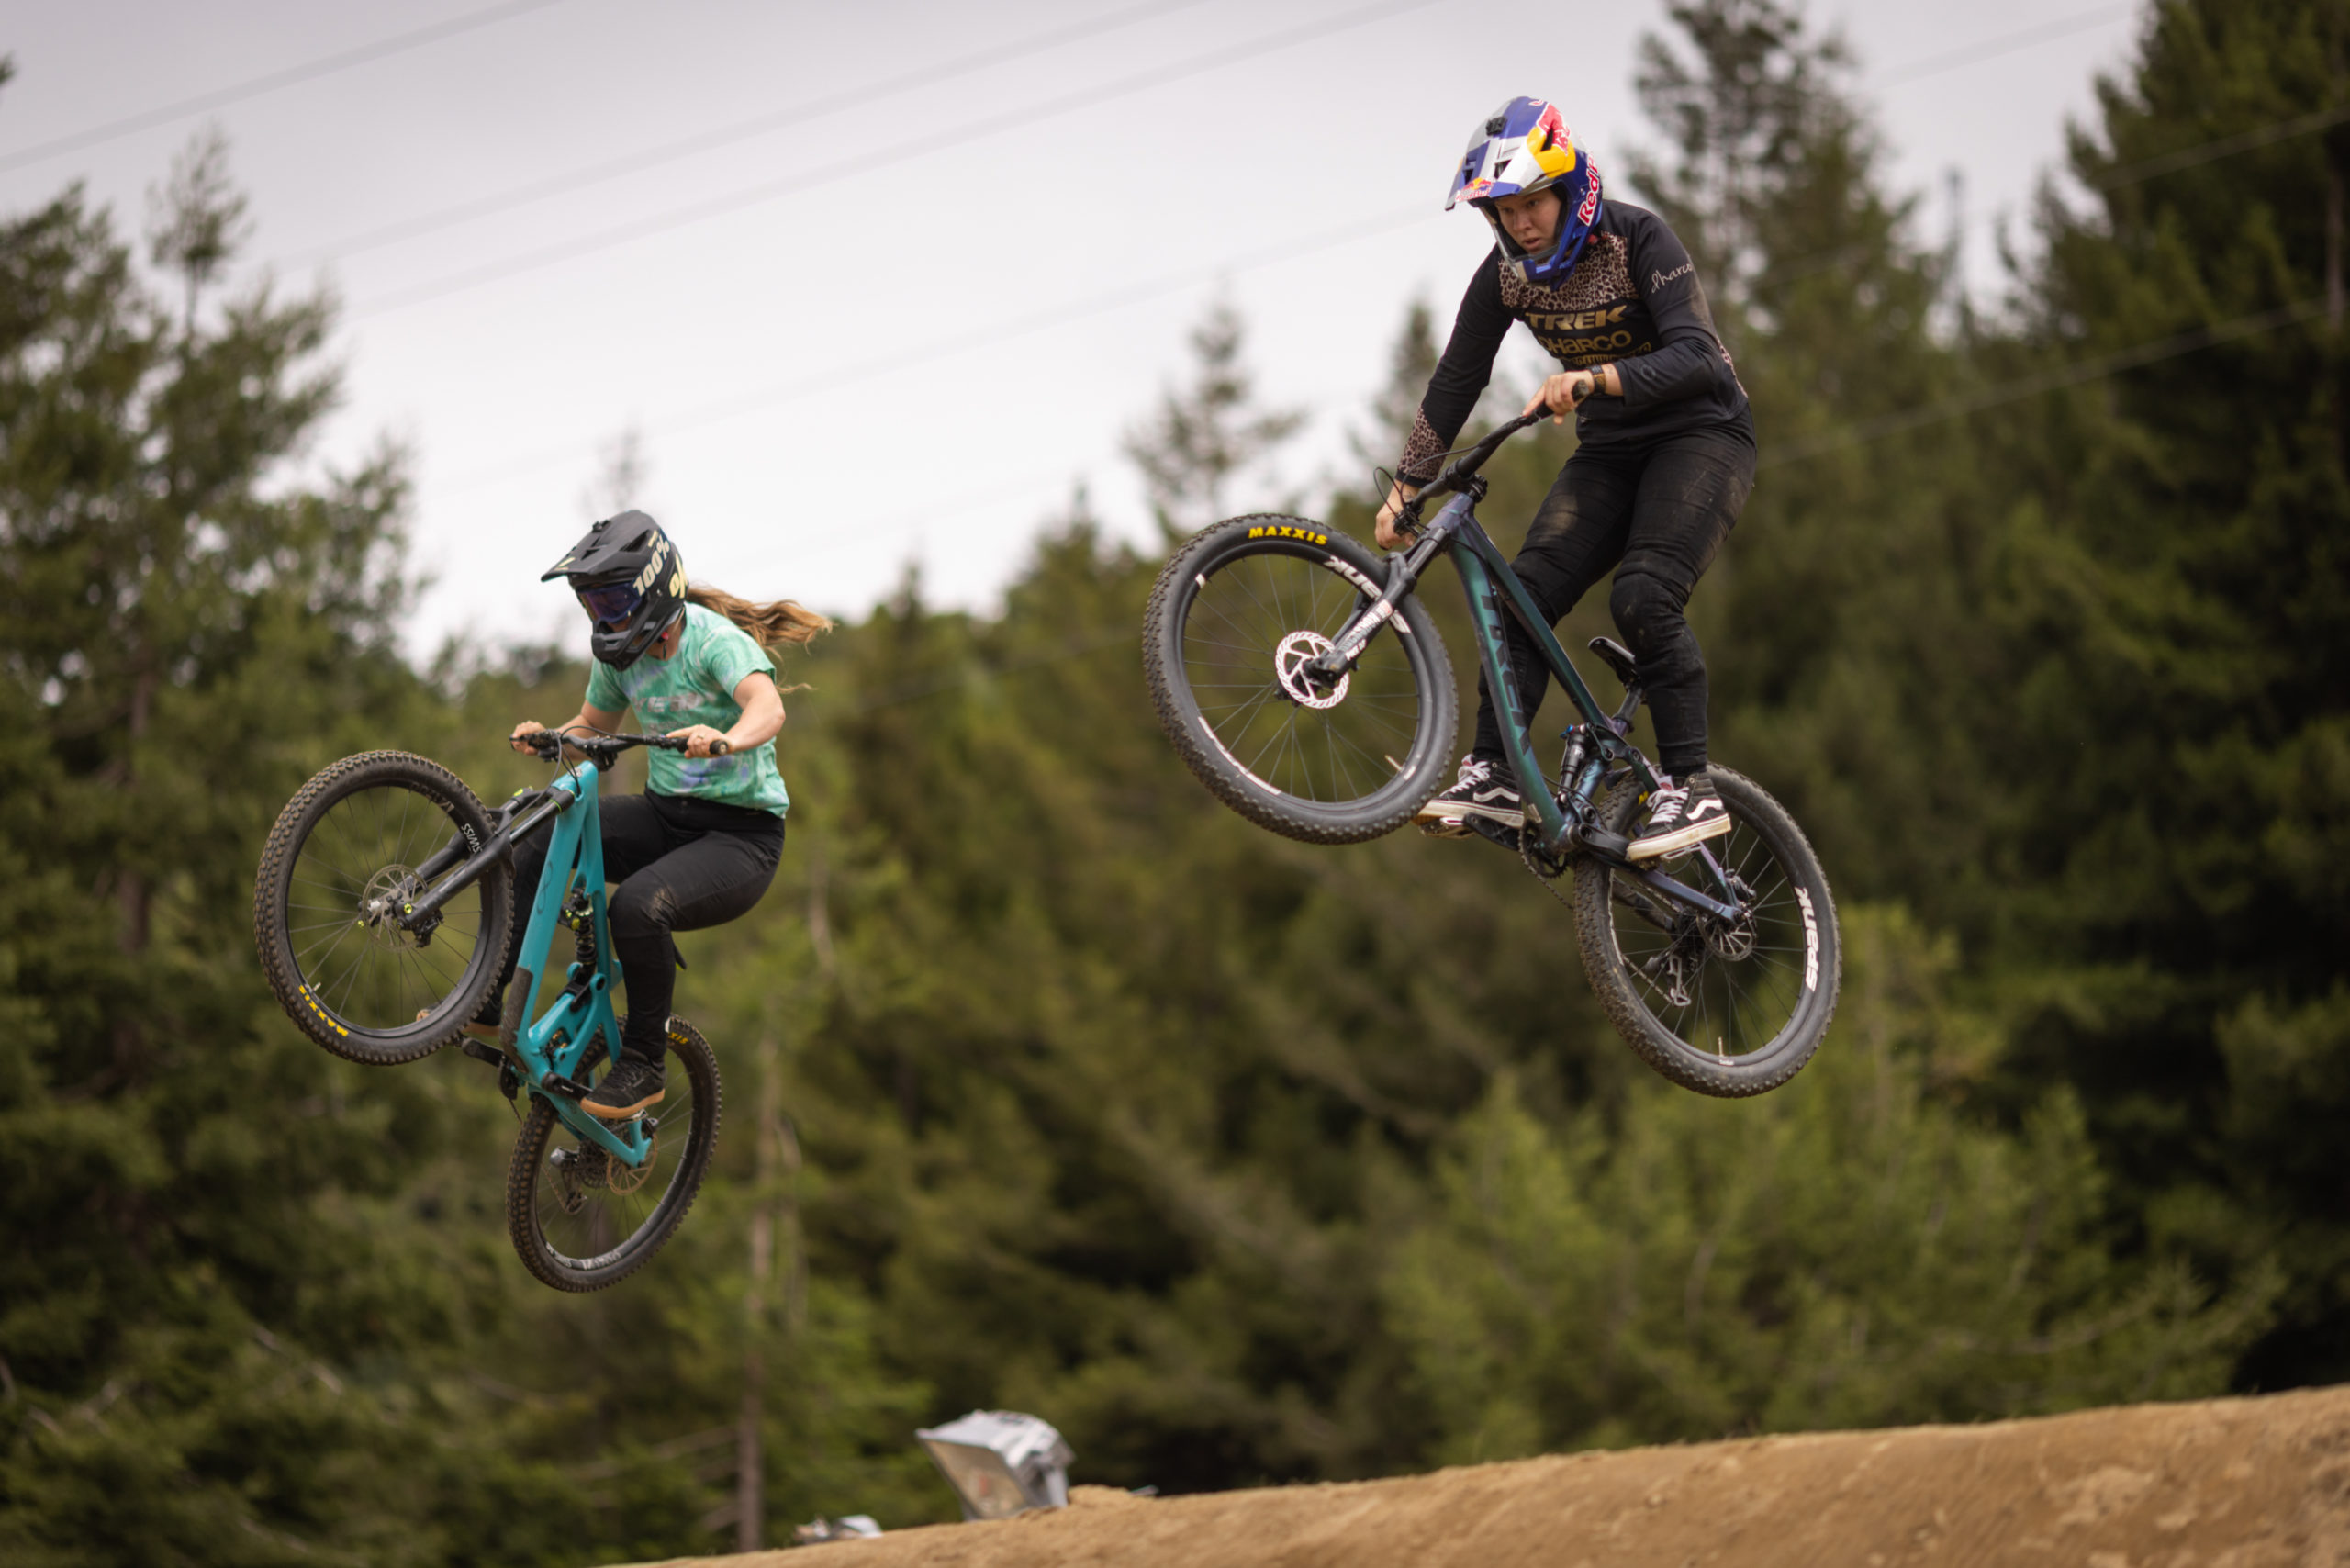 Two riders jumping during the speed & style competition